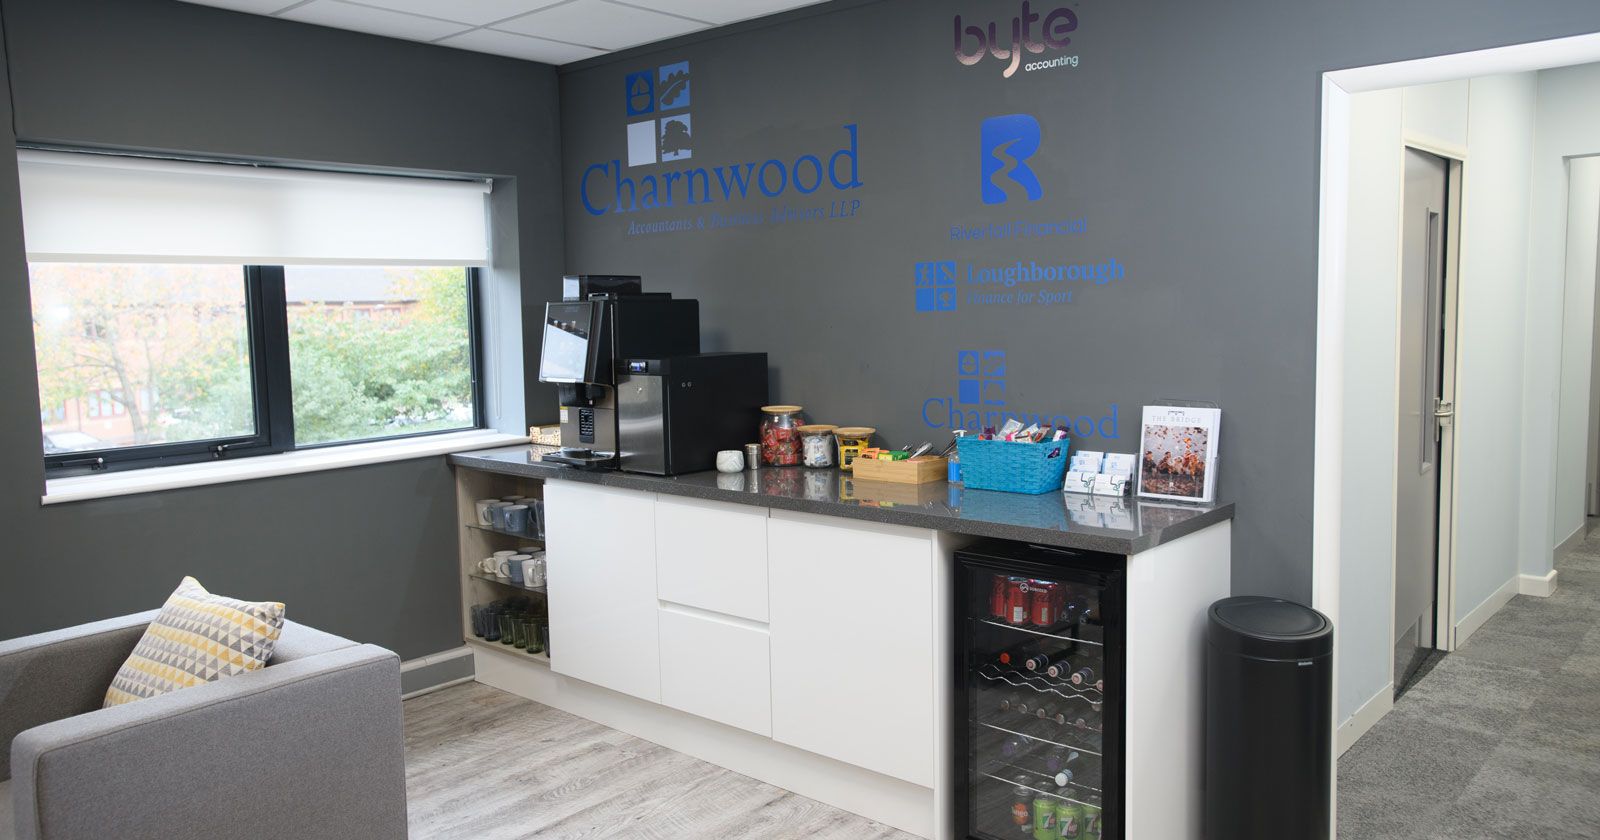 Charnwood-Accountants-Break-Out-Area-Staff-Kitchen-Designed-and-installed-by-APSS